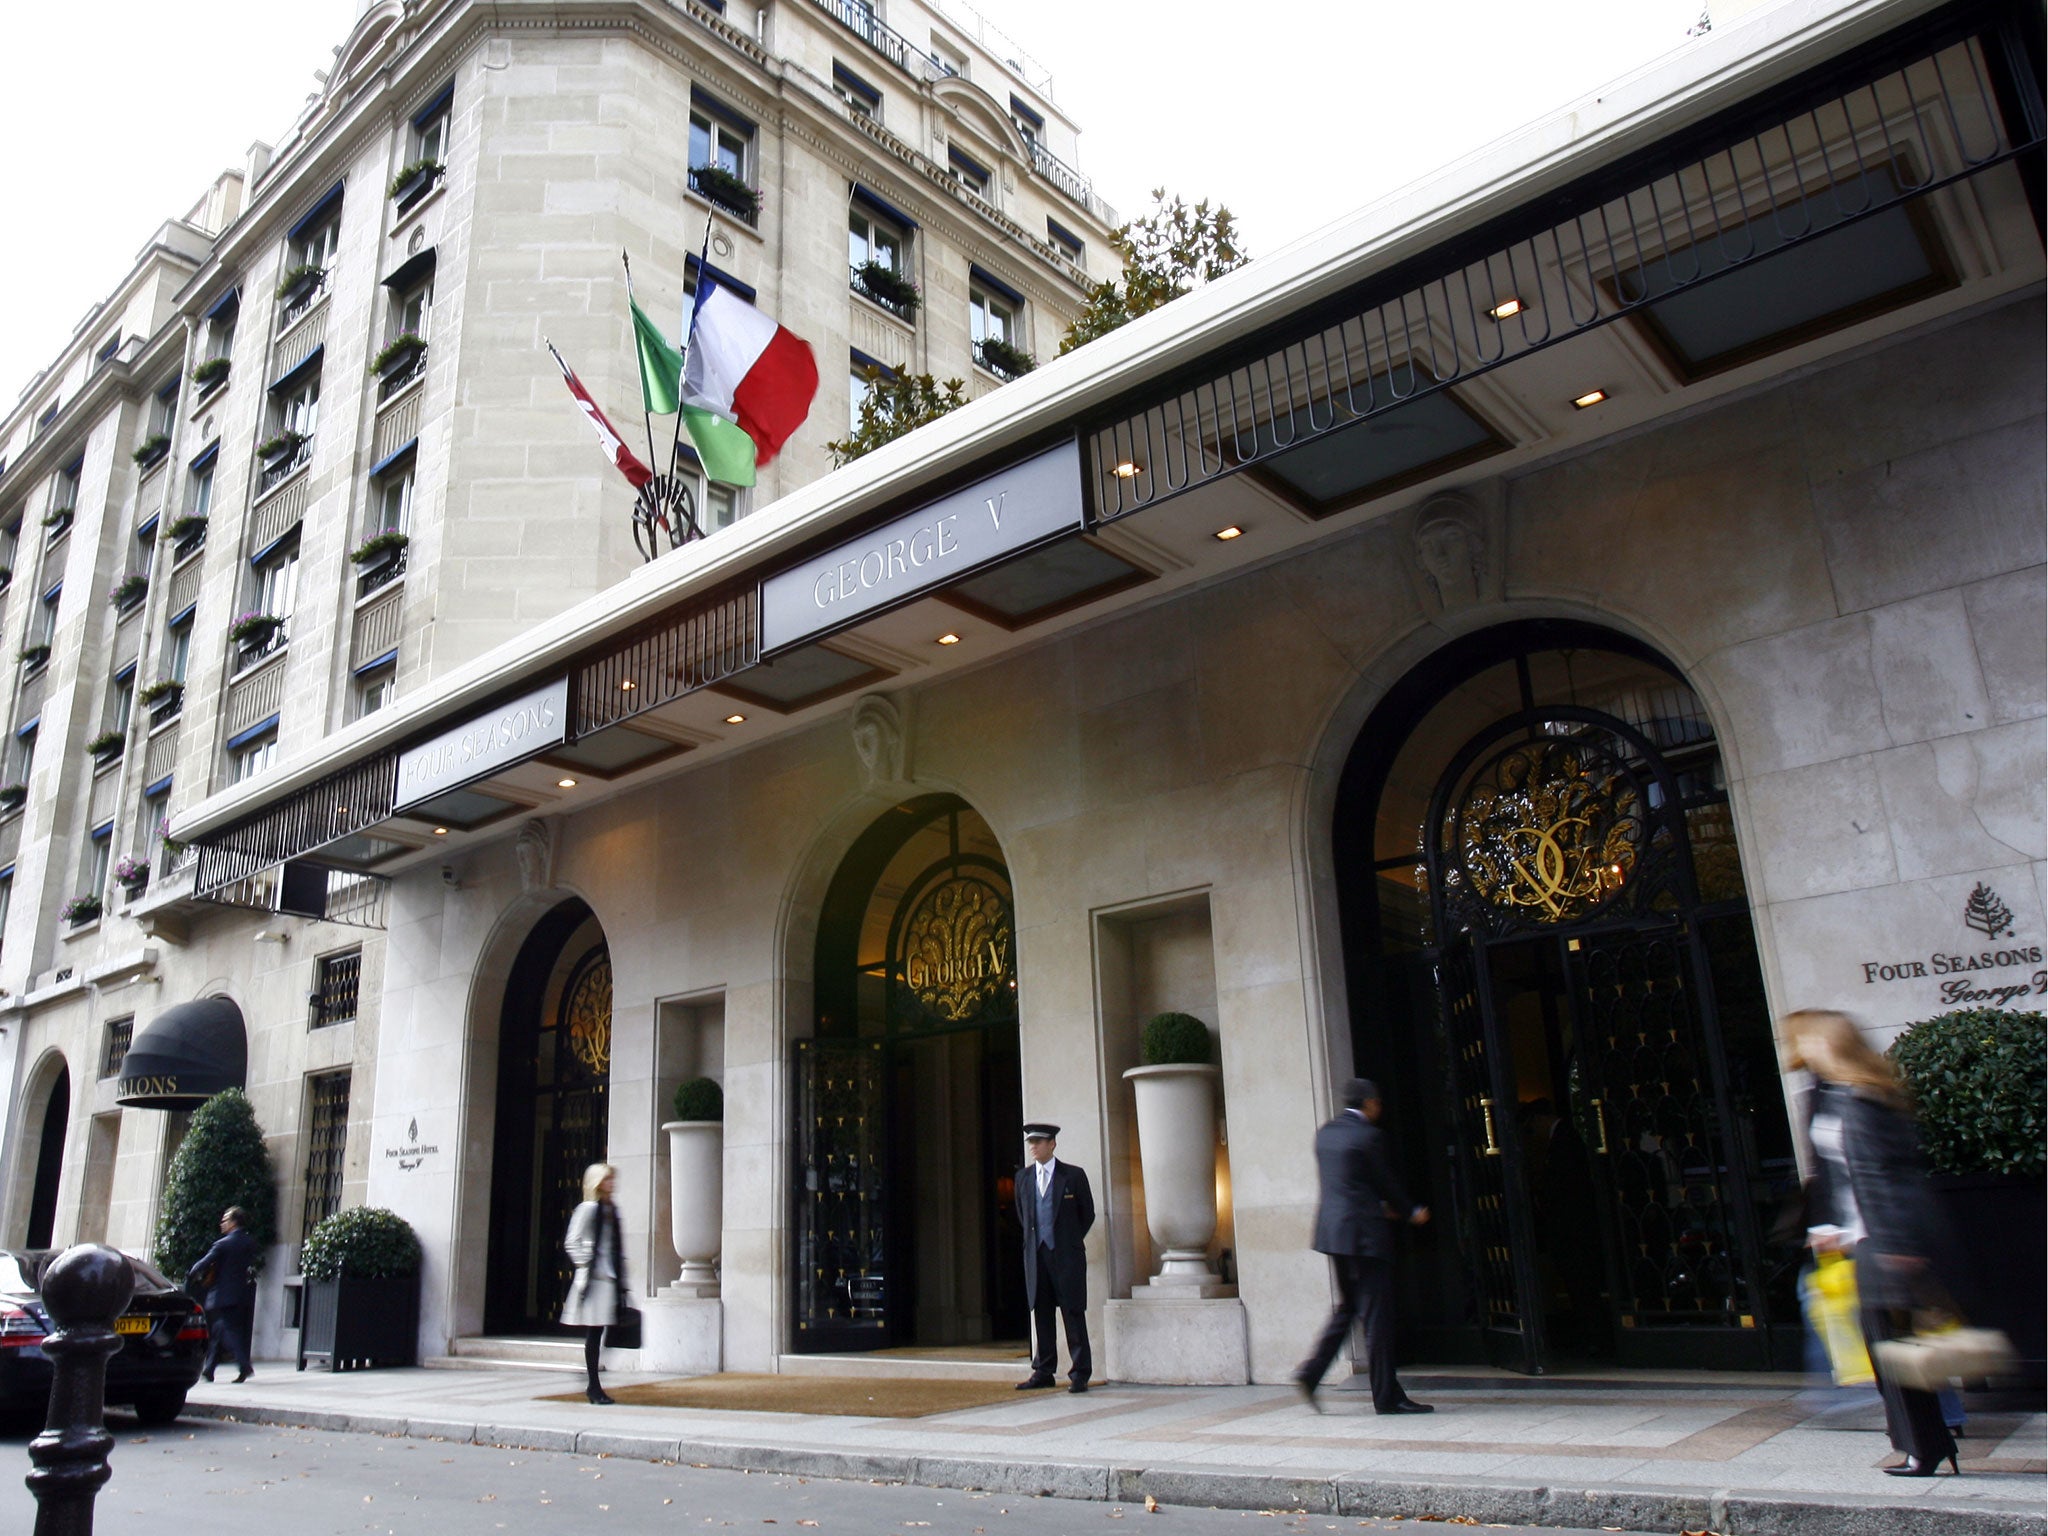 The manager of Paris’s Four Seasons George V believes many guests, especially families, will abandon the city’s five-star hotels